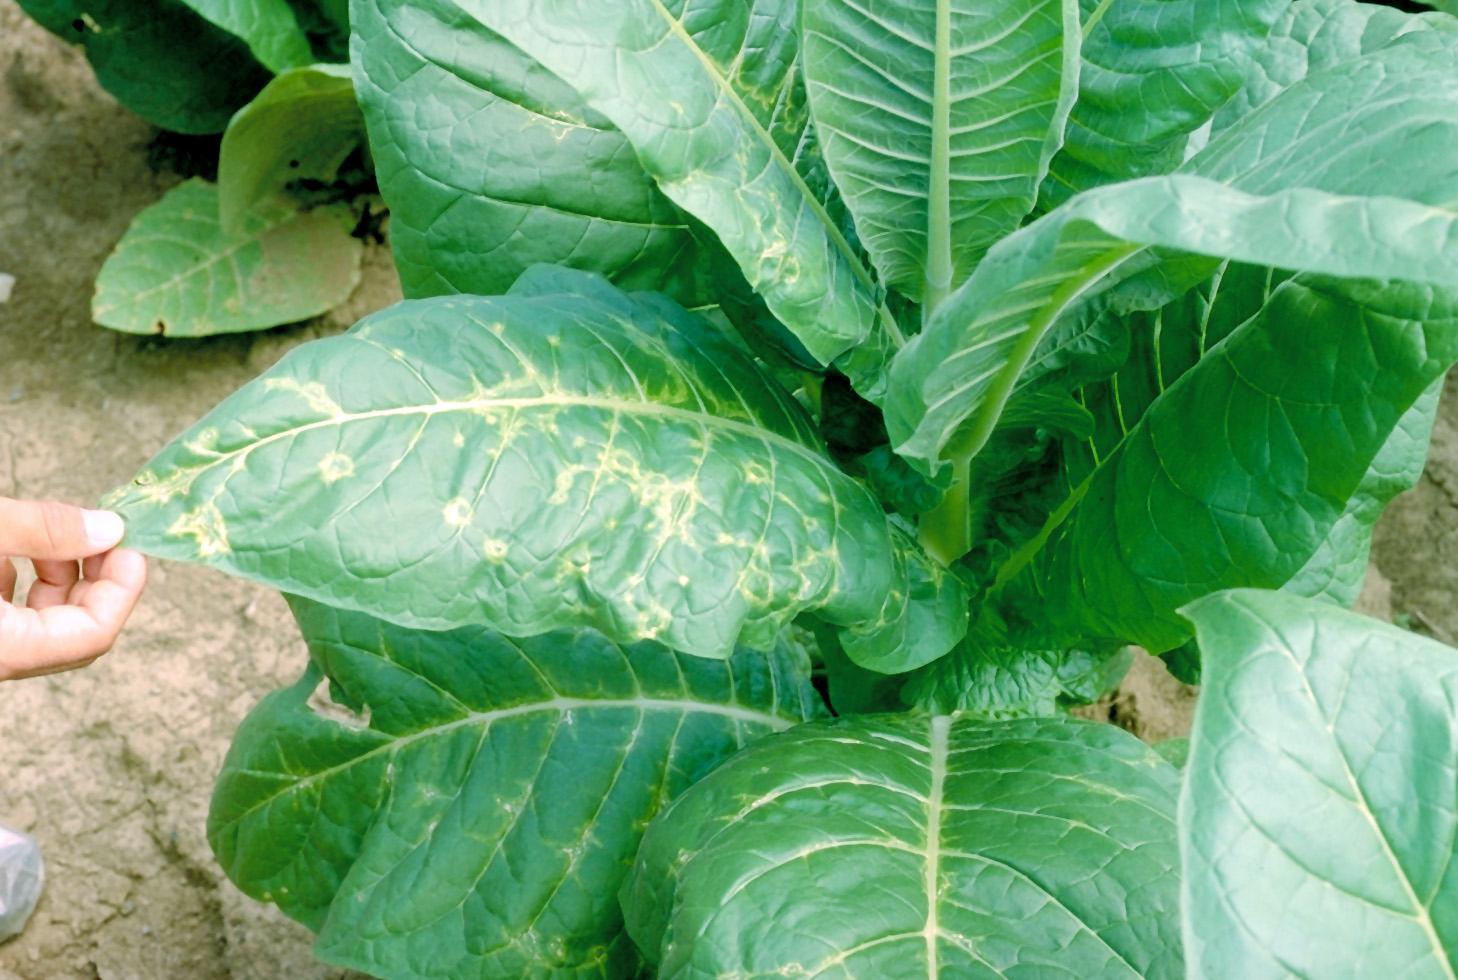 Tobacco ringspot virus results in chorotic (yellow) and necrotic (brown) rings on foliage.  Symptoms may occur predominantly on one side of a plant. (Photo: William Nesmith, UK)